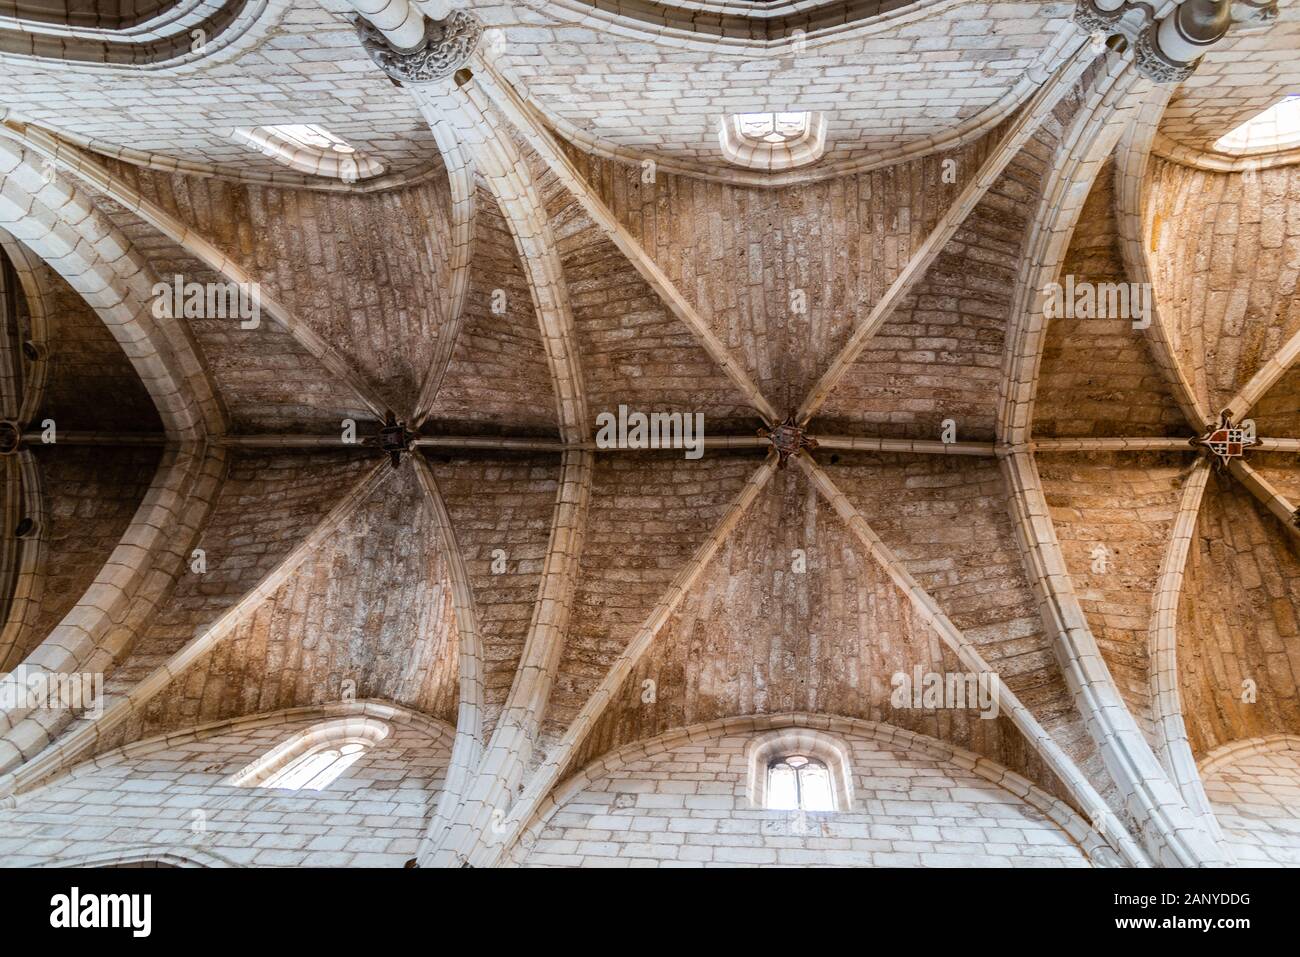 Covarrubias, Spain - April 16, 2019: Directly below view of the vaults of the church of de San Cosme and San Damian Stock Photo